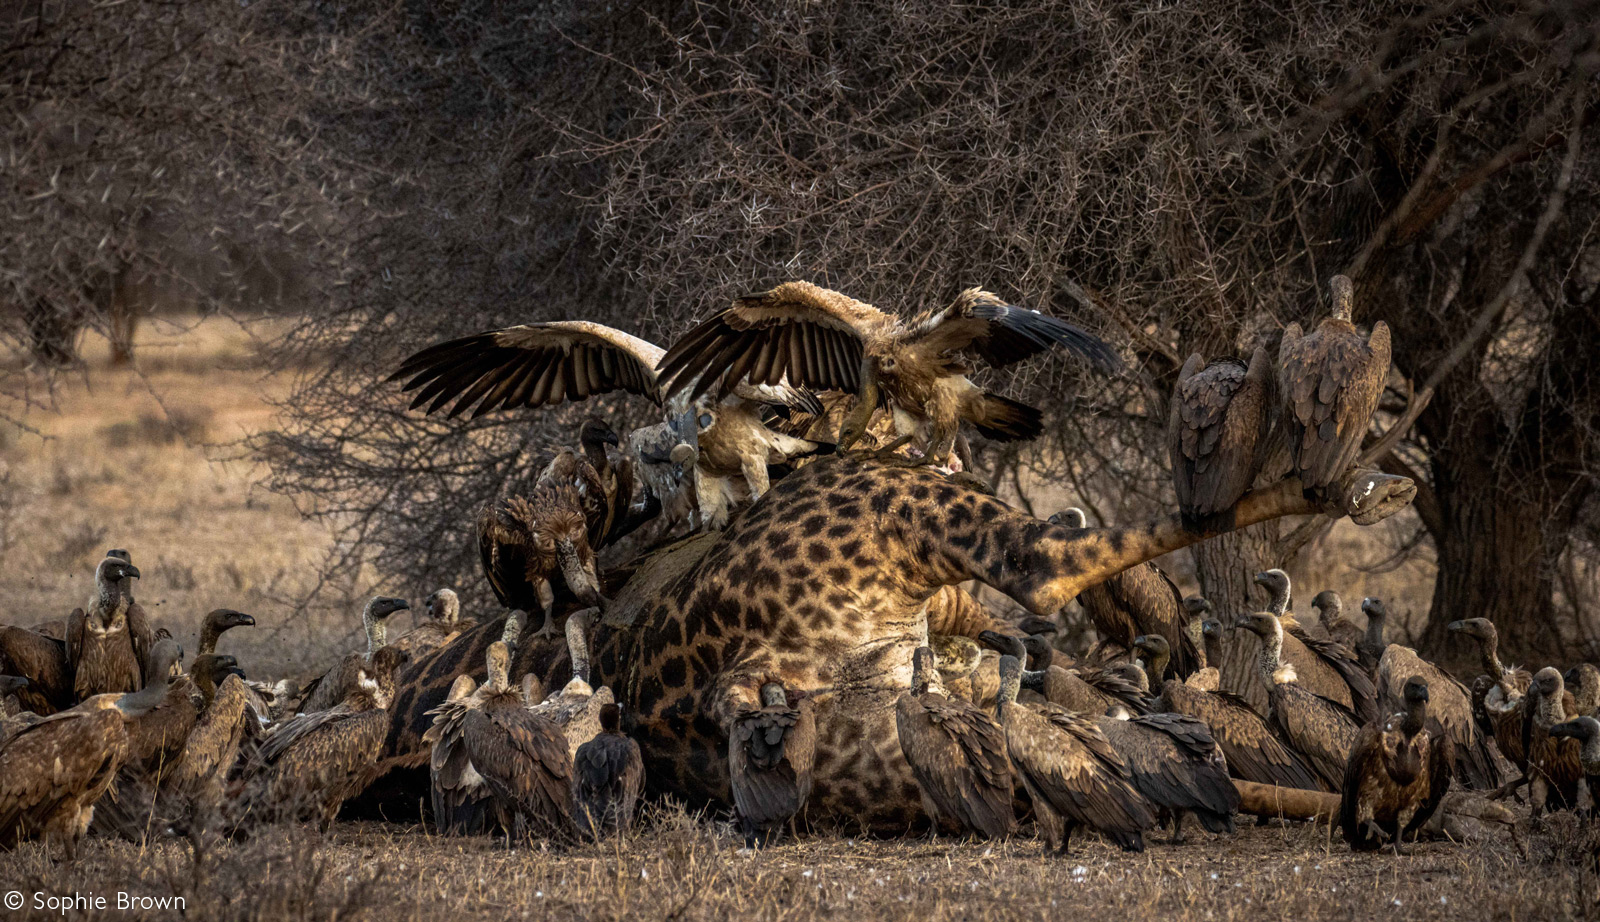 Vultures descend to make the most of a large giraffe carcass. Greater Kruger National Park, South Africa © Sophie Brown